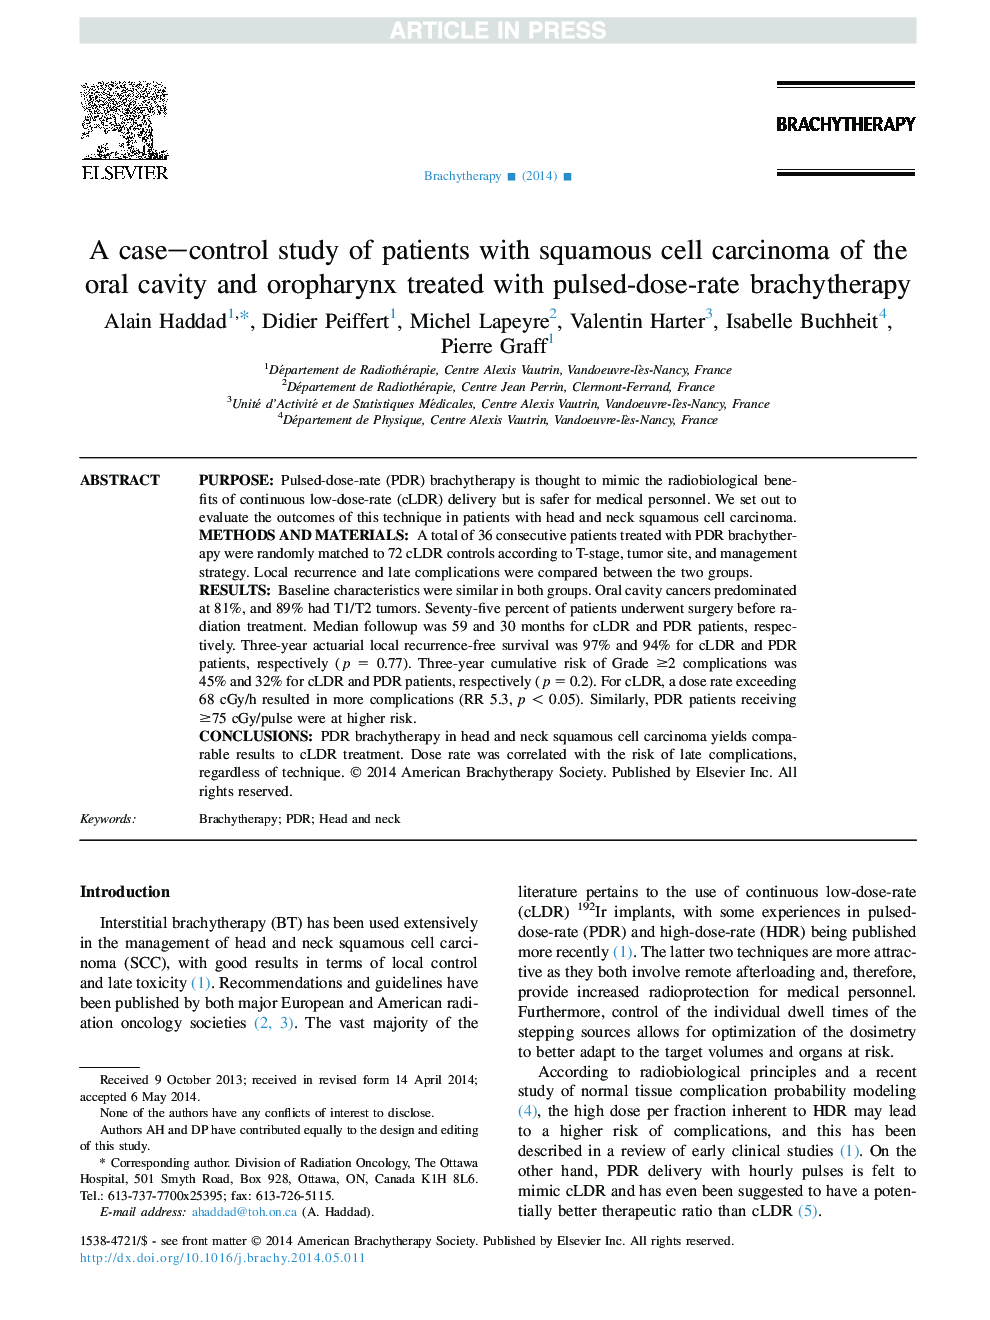 A case-control study of patients with squamous cell carcinoma of the oral cavity and oropharynx treated with pulsed-dose-rate brachytherapy